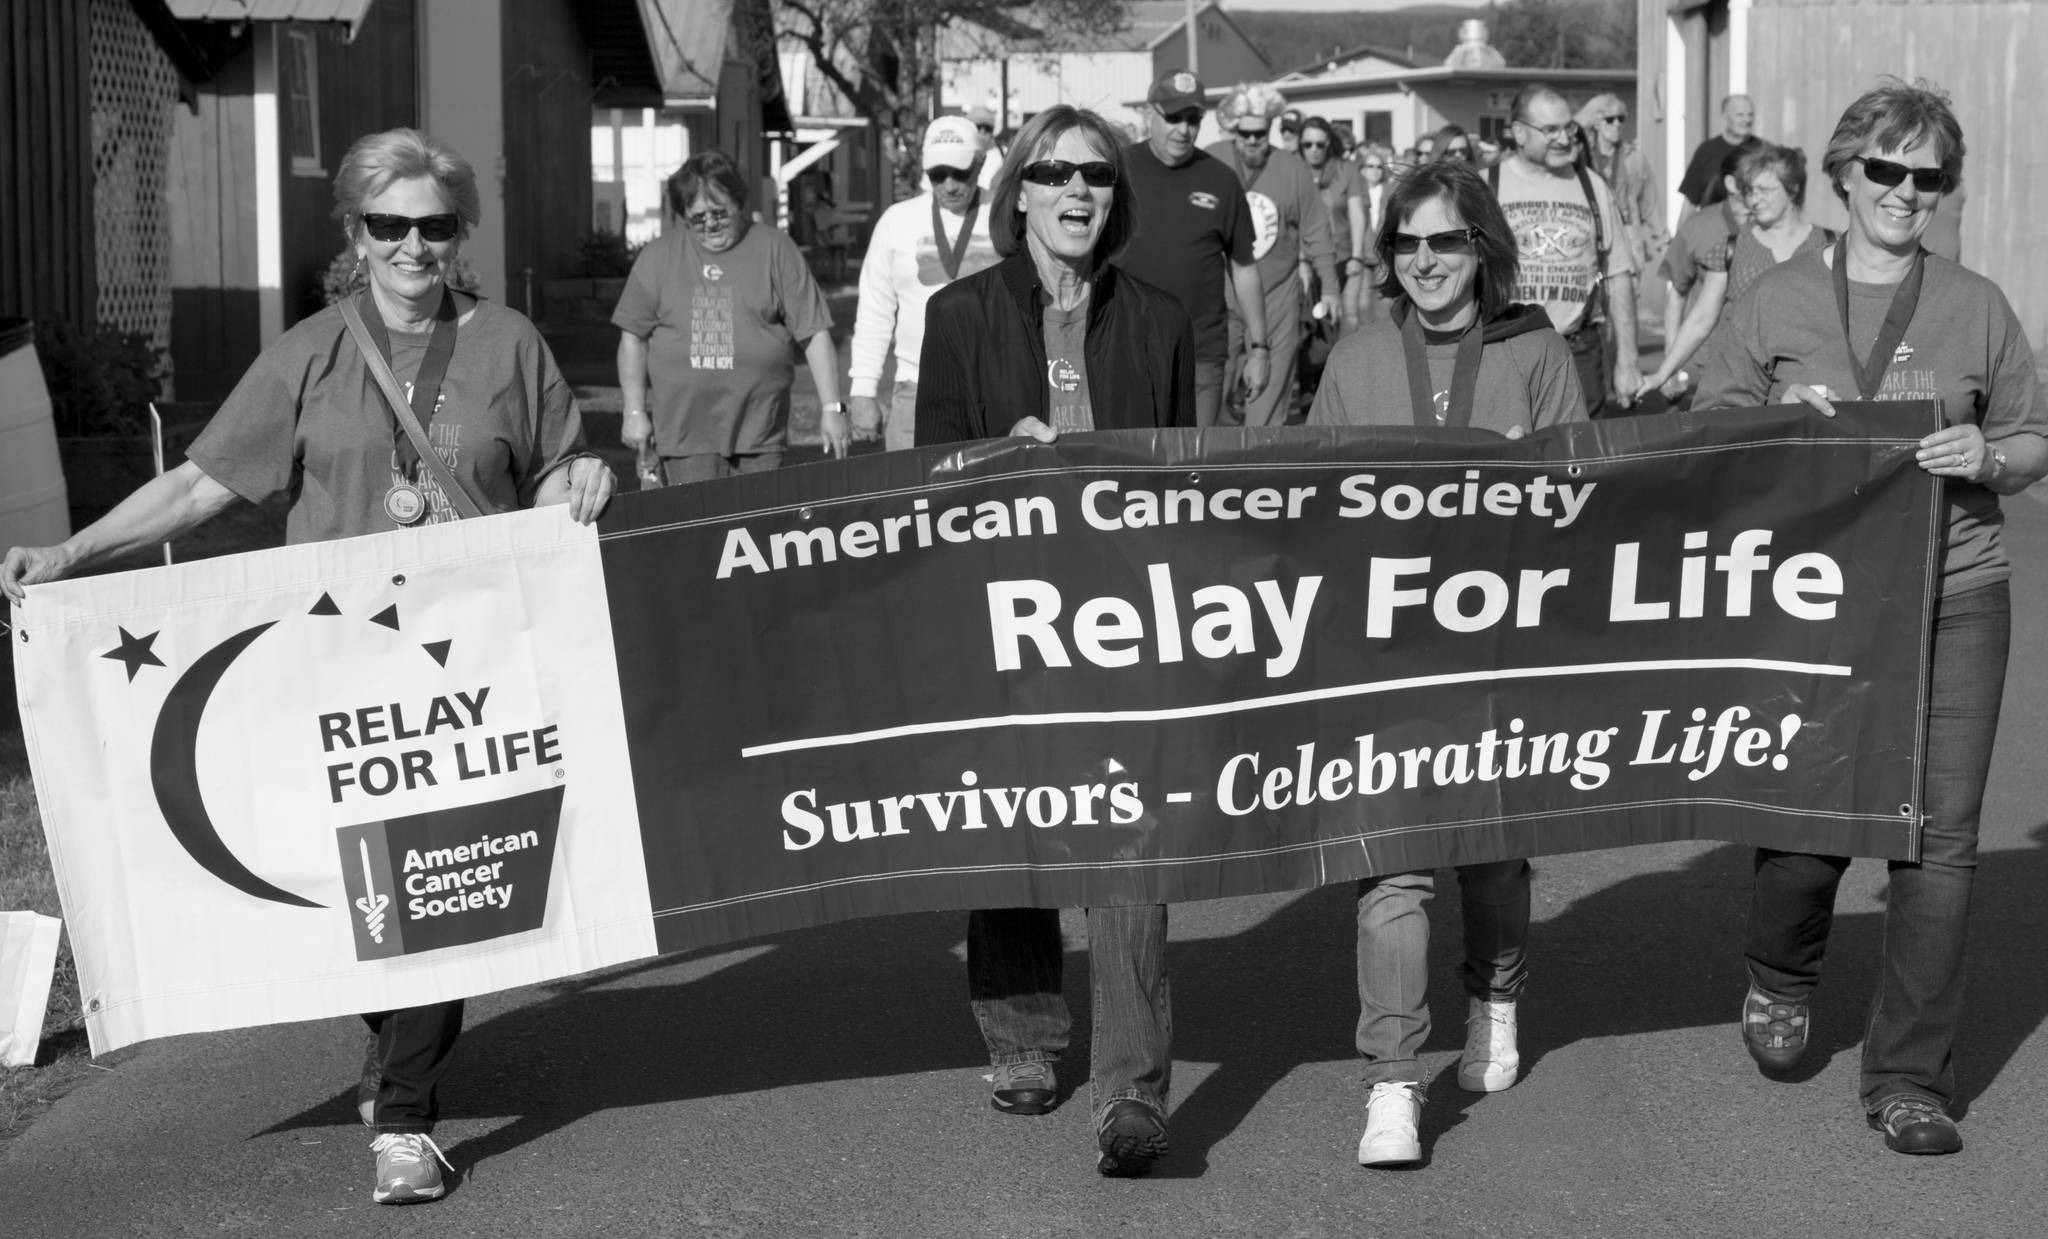 Short but sweet: East County Relay achieves goal